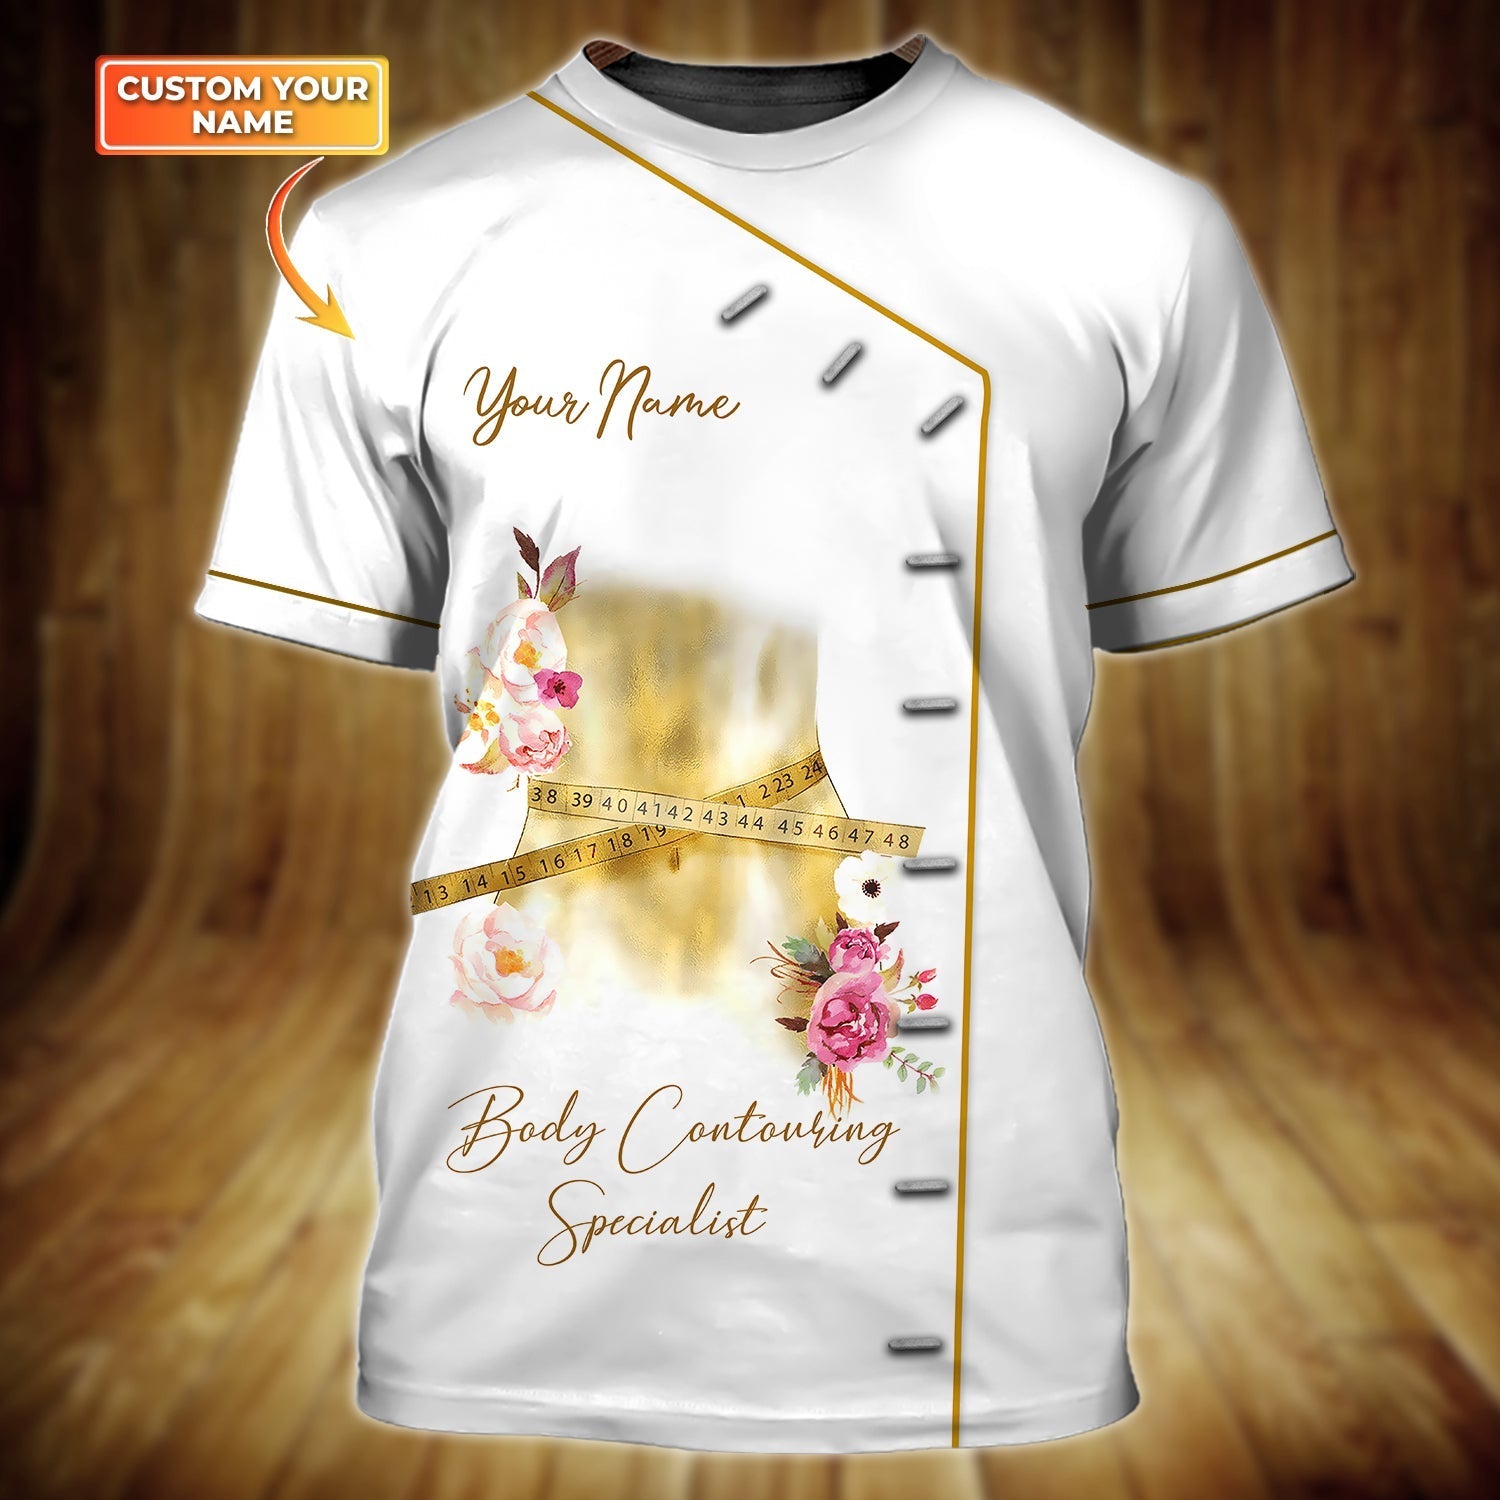 Customized Body Contouring Specialist Shirt, Body Contouring Specialis